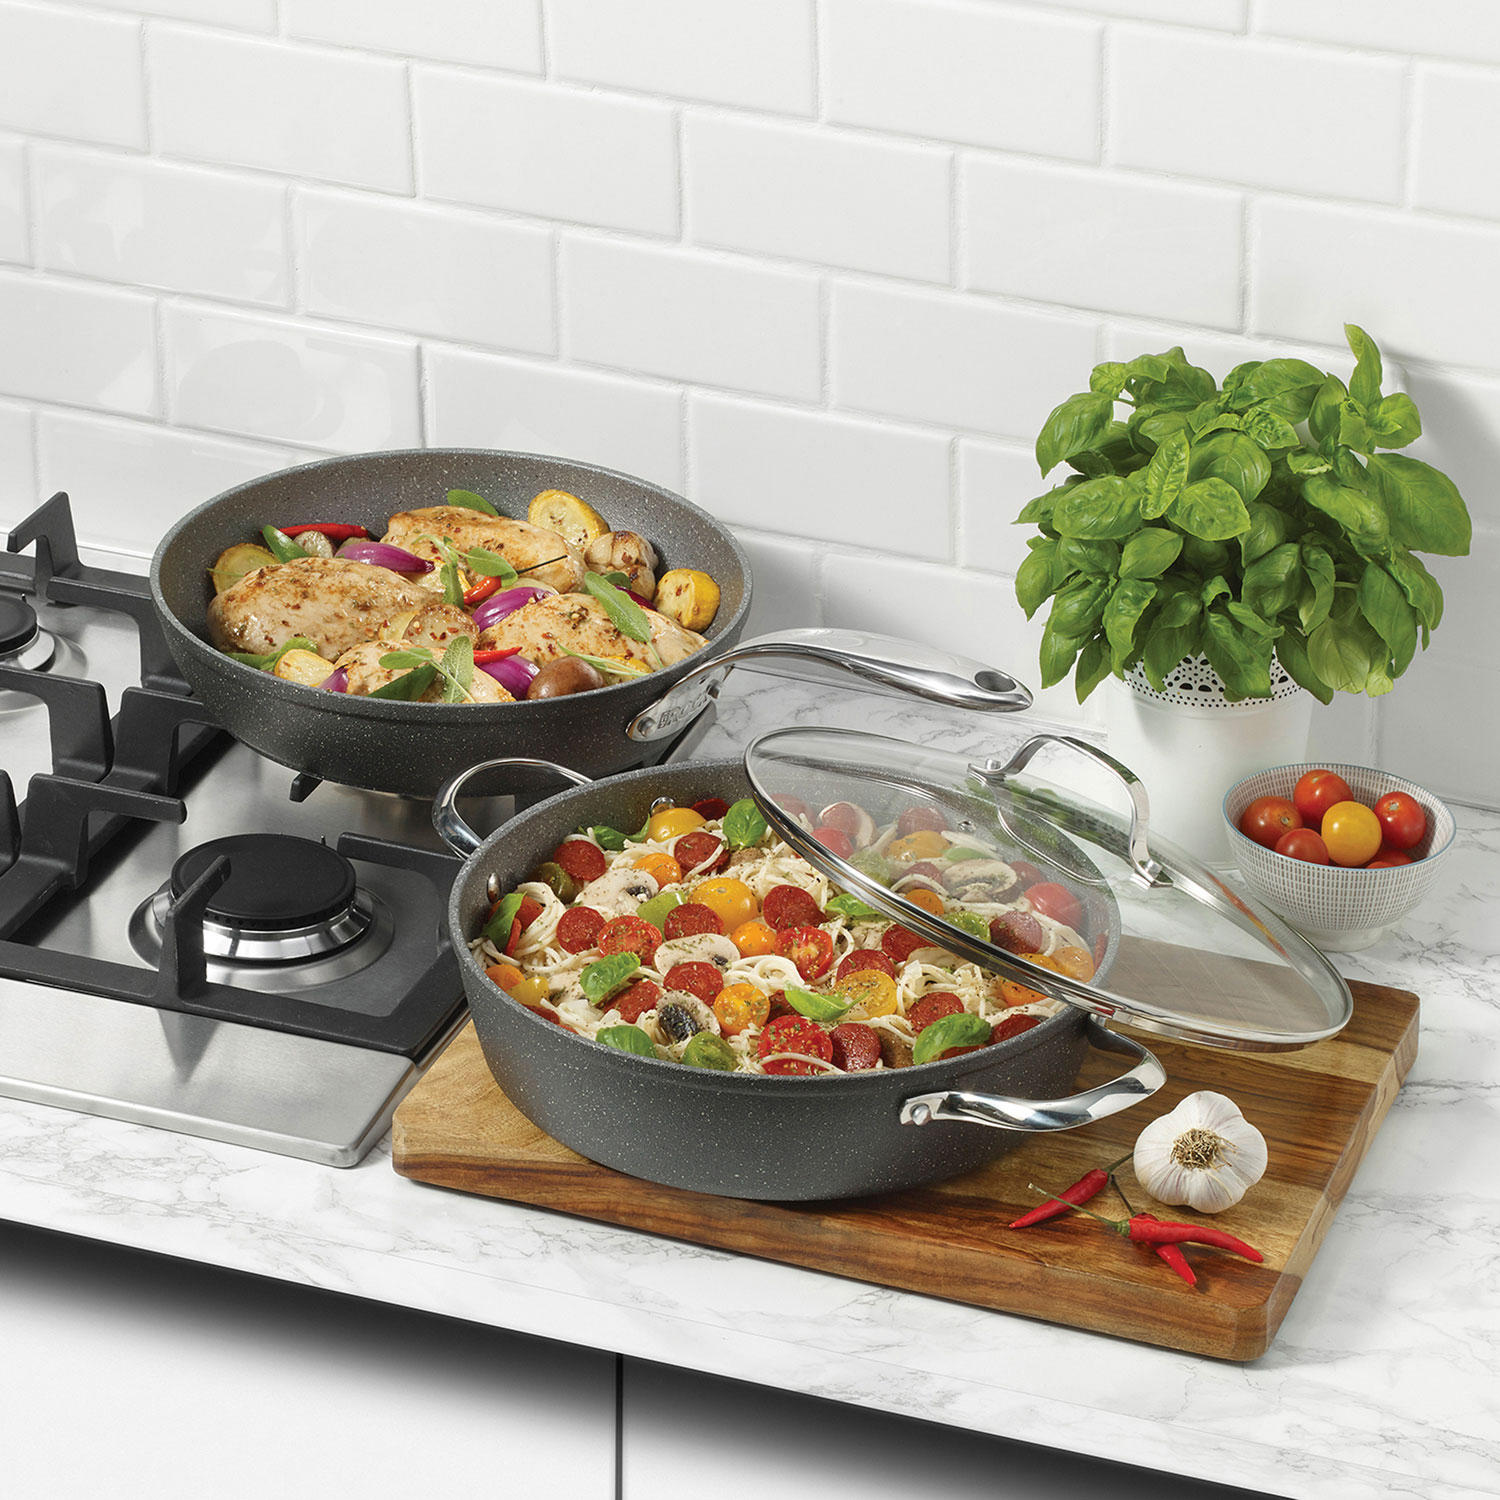 The Rock by Starfrit 3-Piece Cookware Set